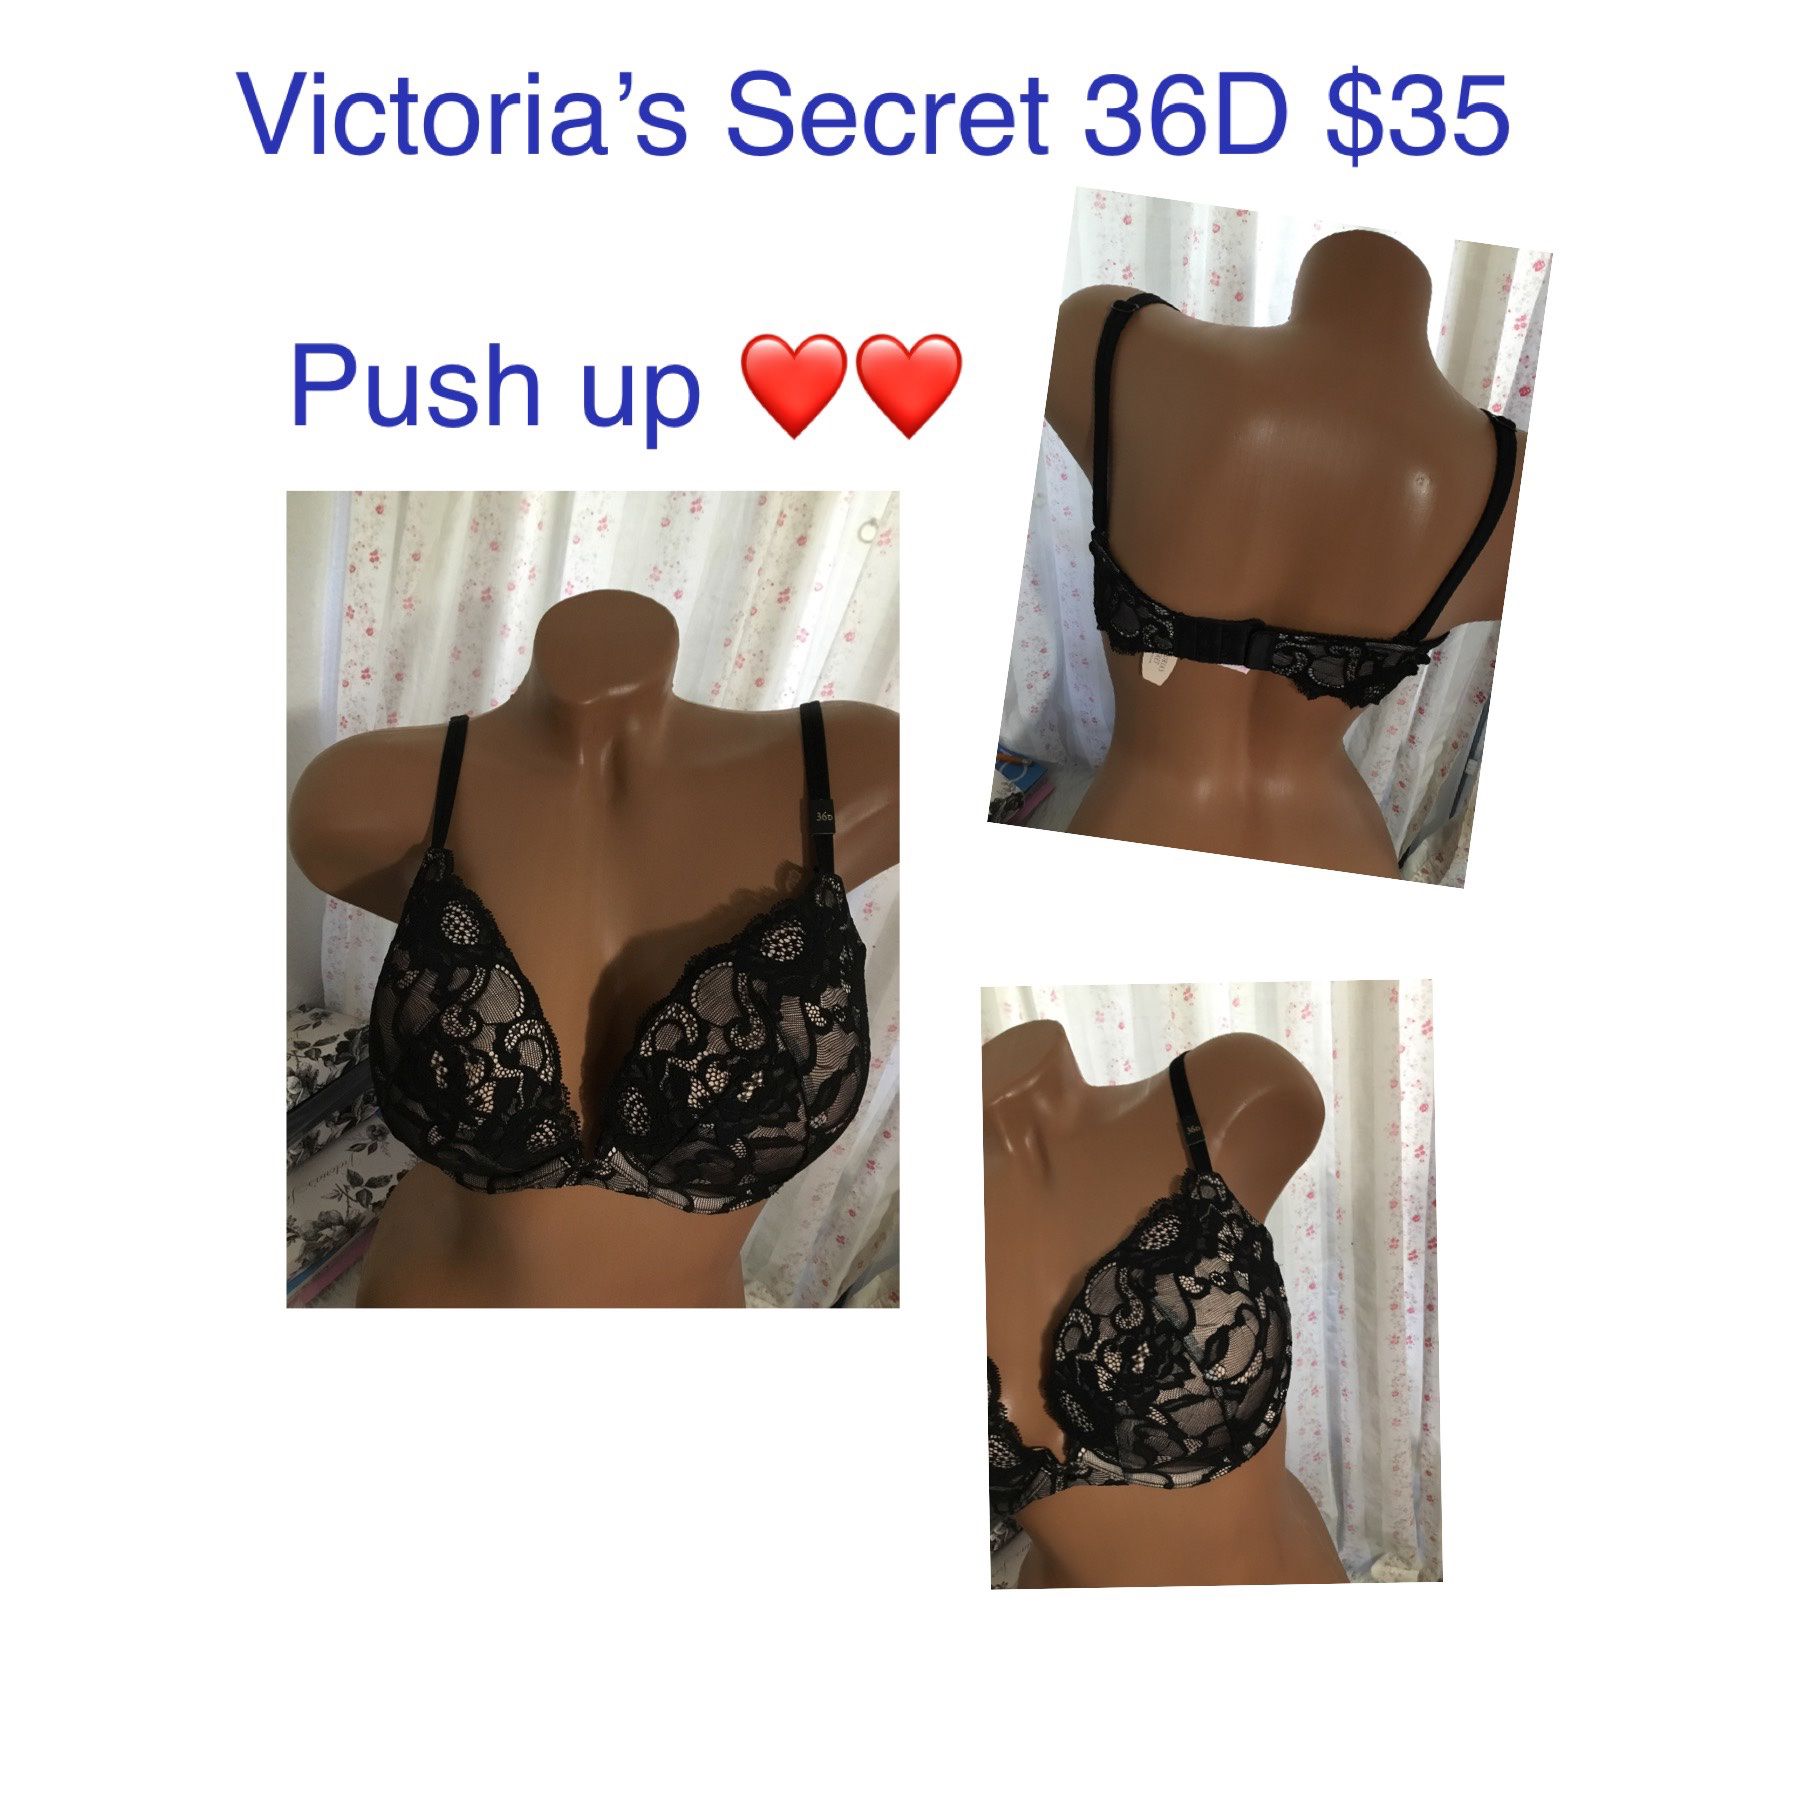 New Bra Victoria Secret Very Sexy Push Up Pigeonnant 36Dfirm Price for Sale  in Los Angeles, CA - OfferUp